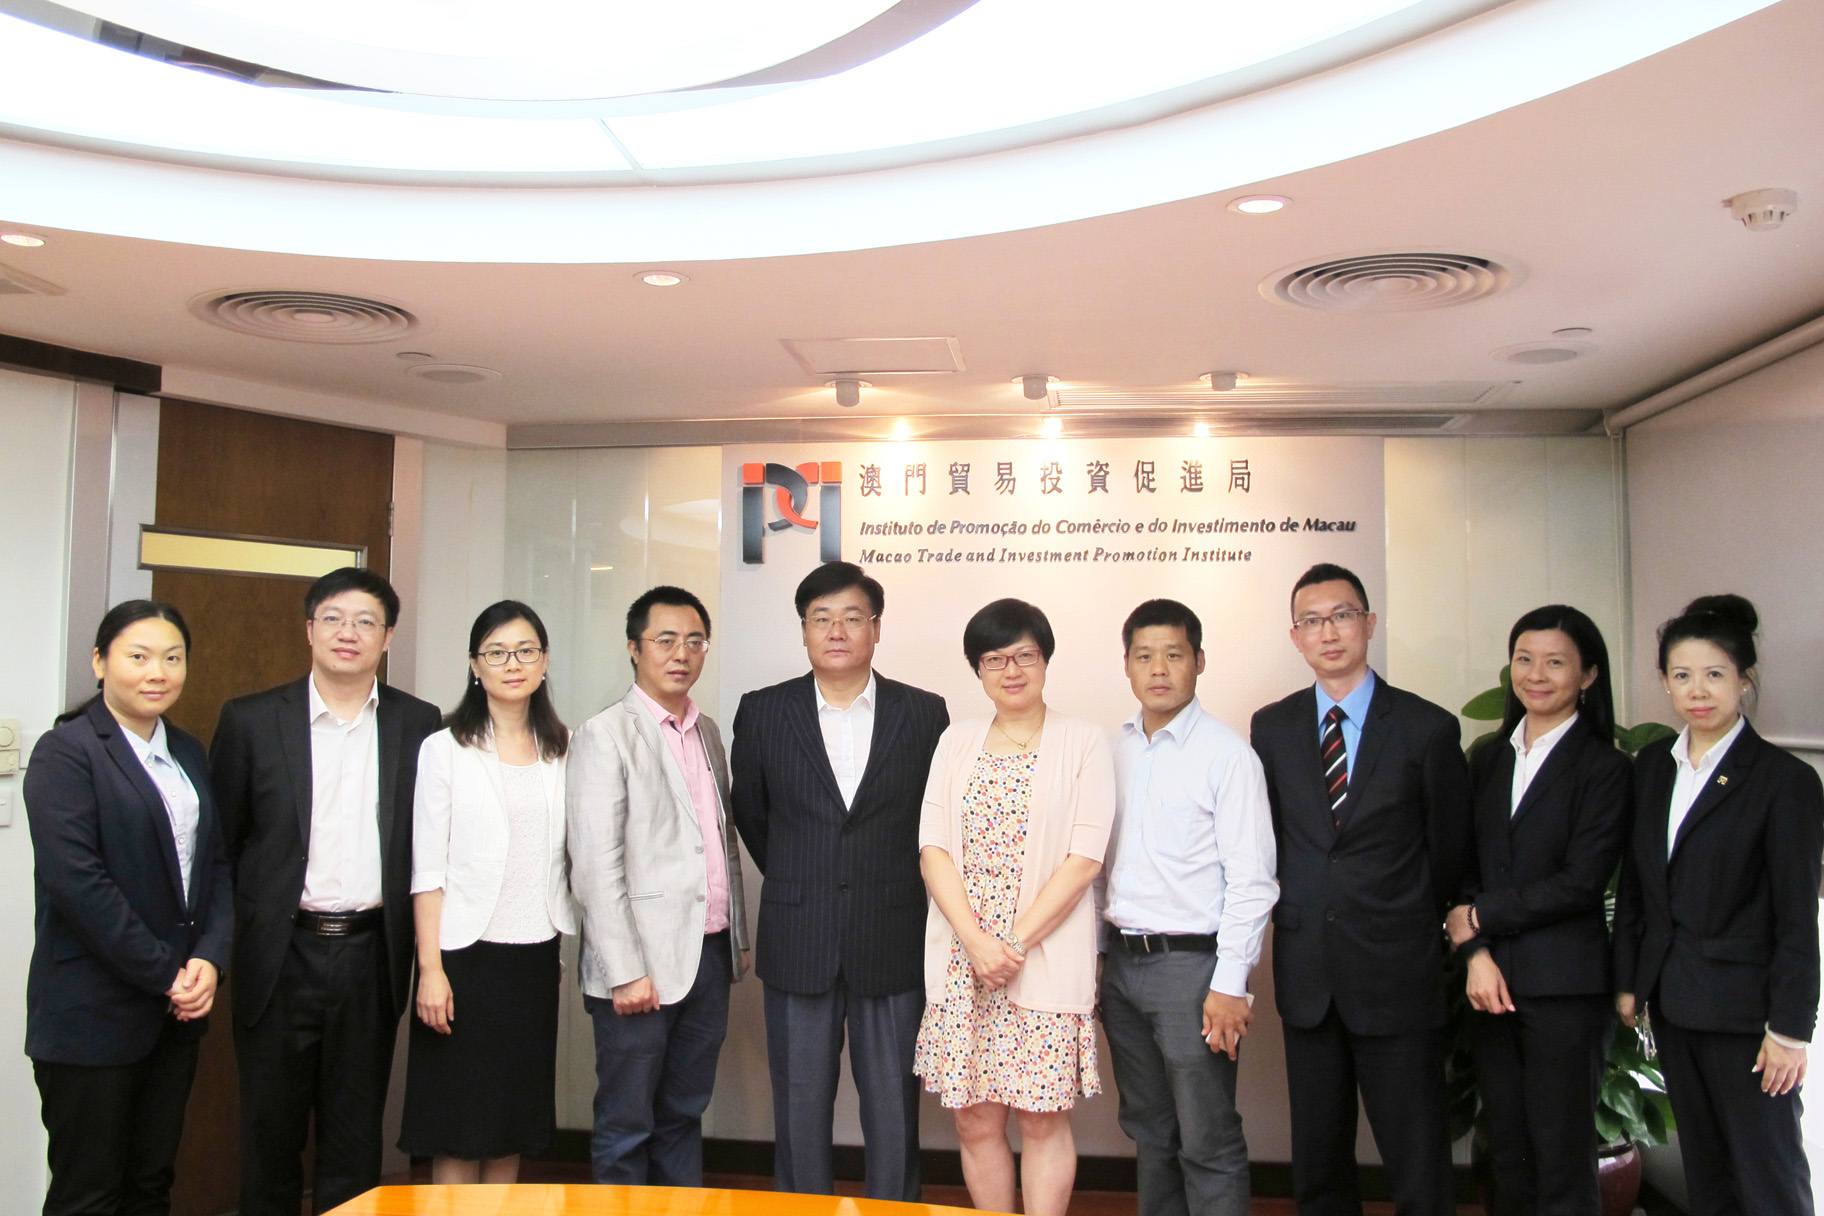 IPIM’s Executive Director Gloria Ung with Deputy Director General of the Hong Kong and Macao Affairs Office of Guangxi Zhuang Autonomous Region Song Haijun and the delegation at IPIM (12 June 2017)